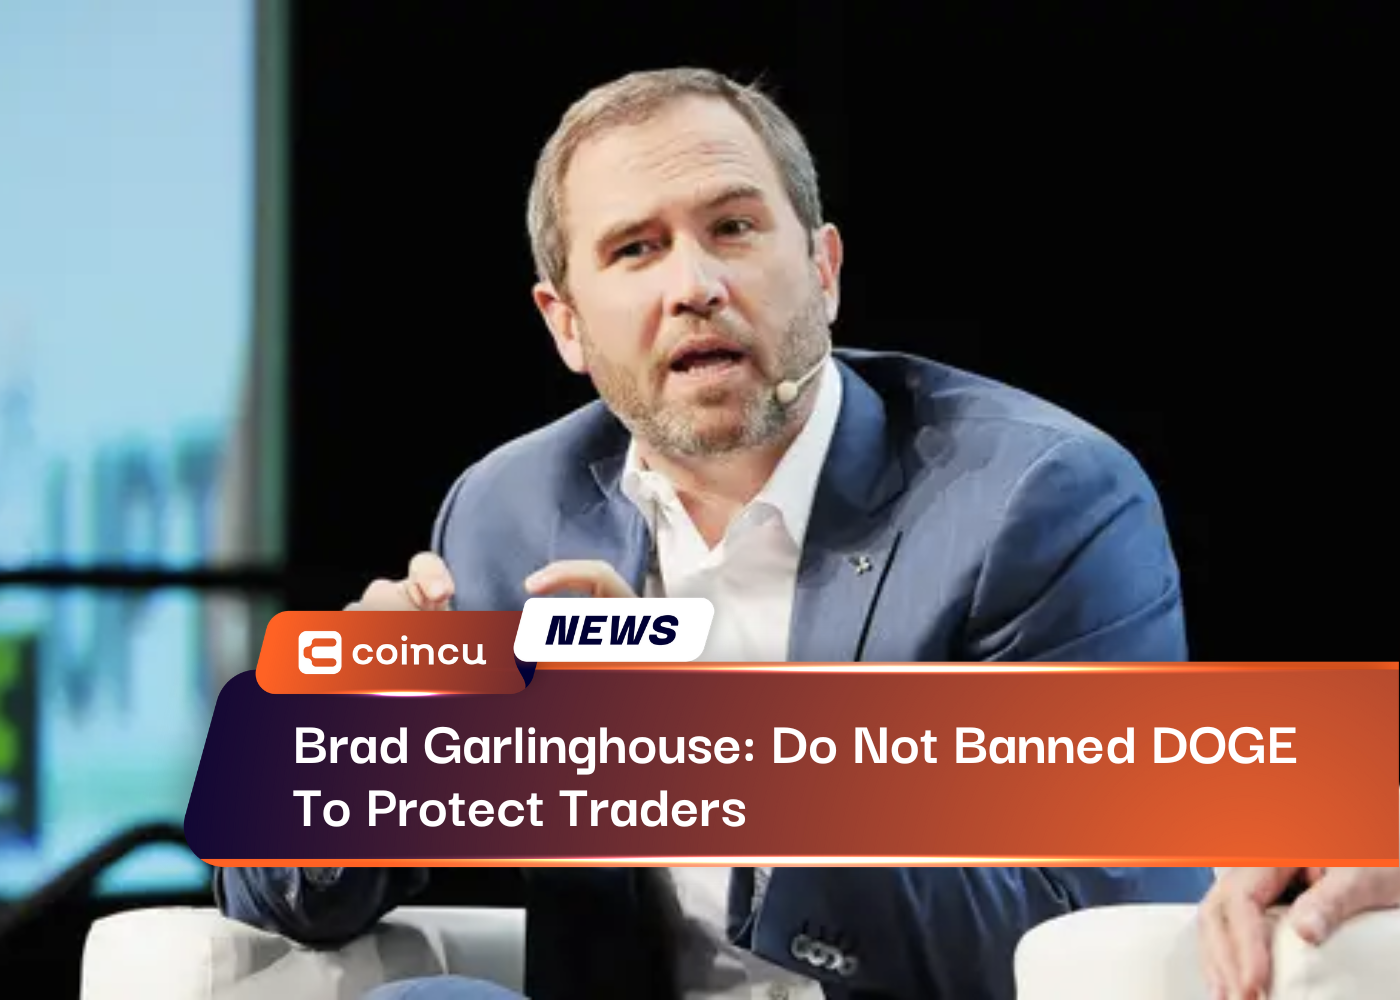 Brad Garlinghouse: Do Not Banned DOGE To Protect Traders